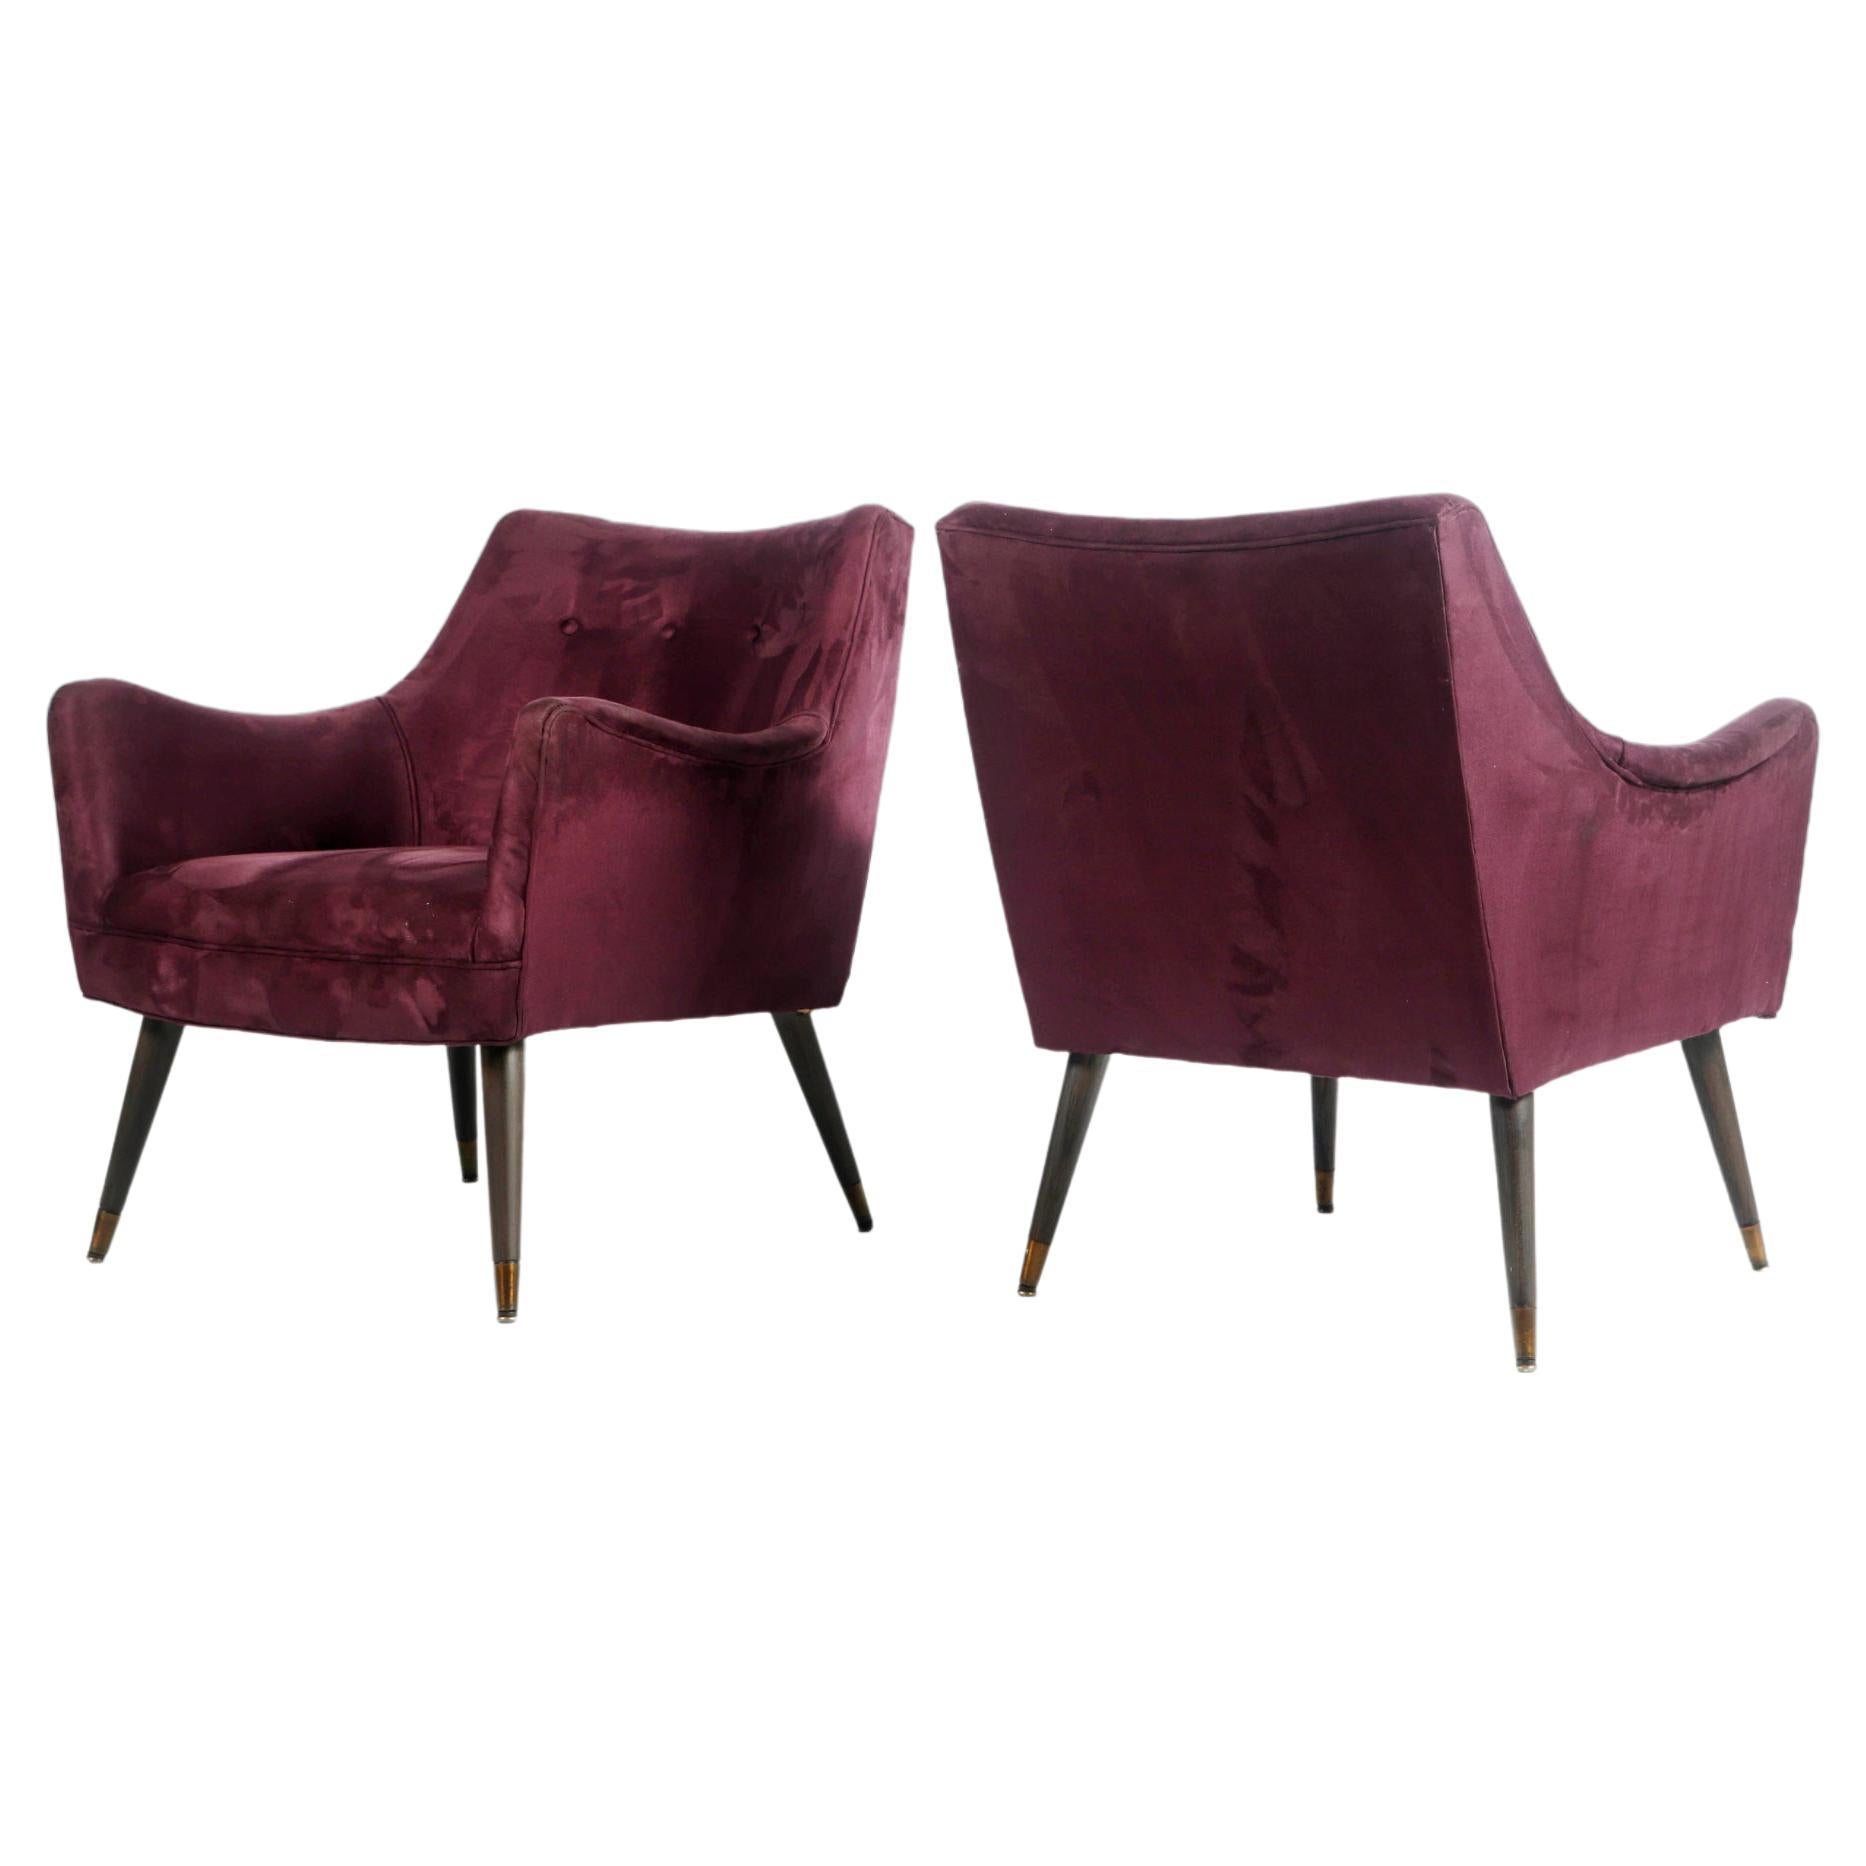 Pair of Mid Century Lounge Chairs in Original Purple Fabric After Paul McCobb For Sale